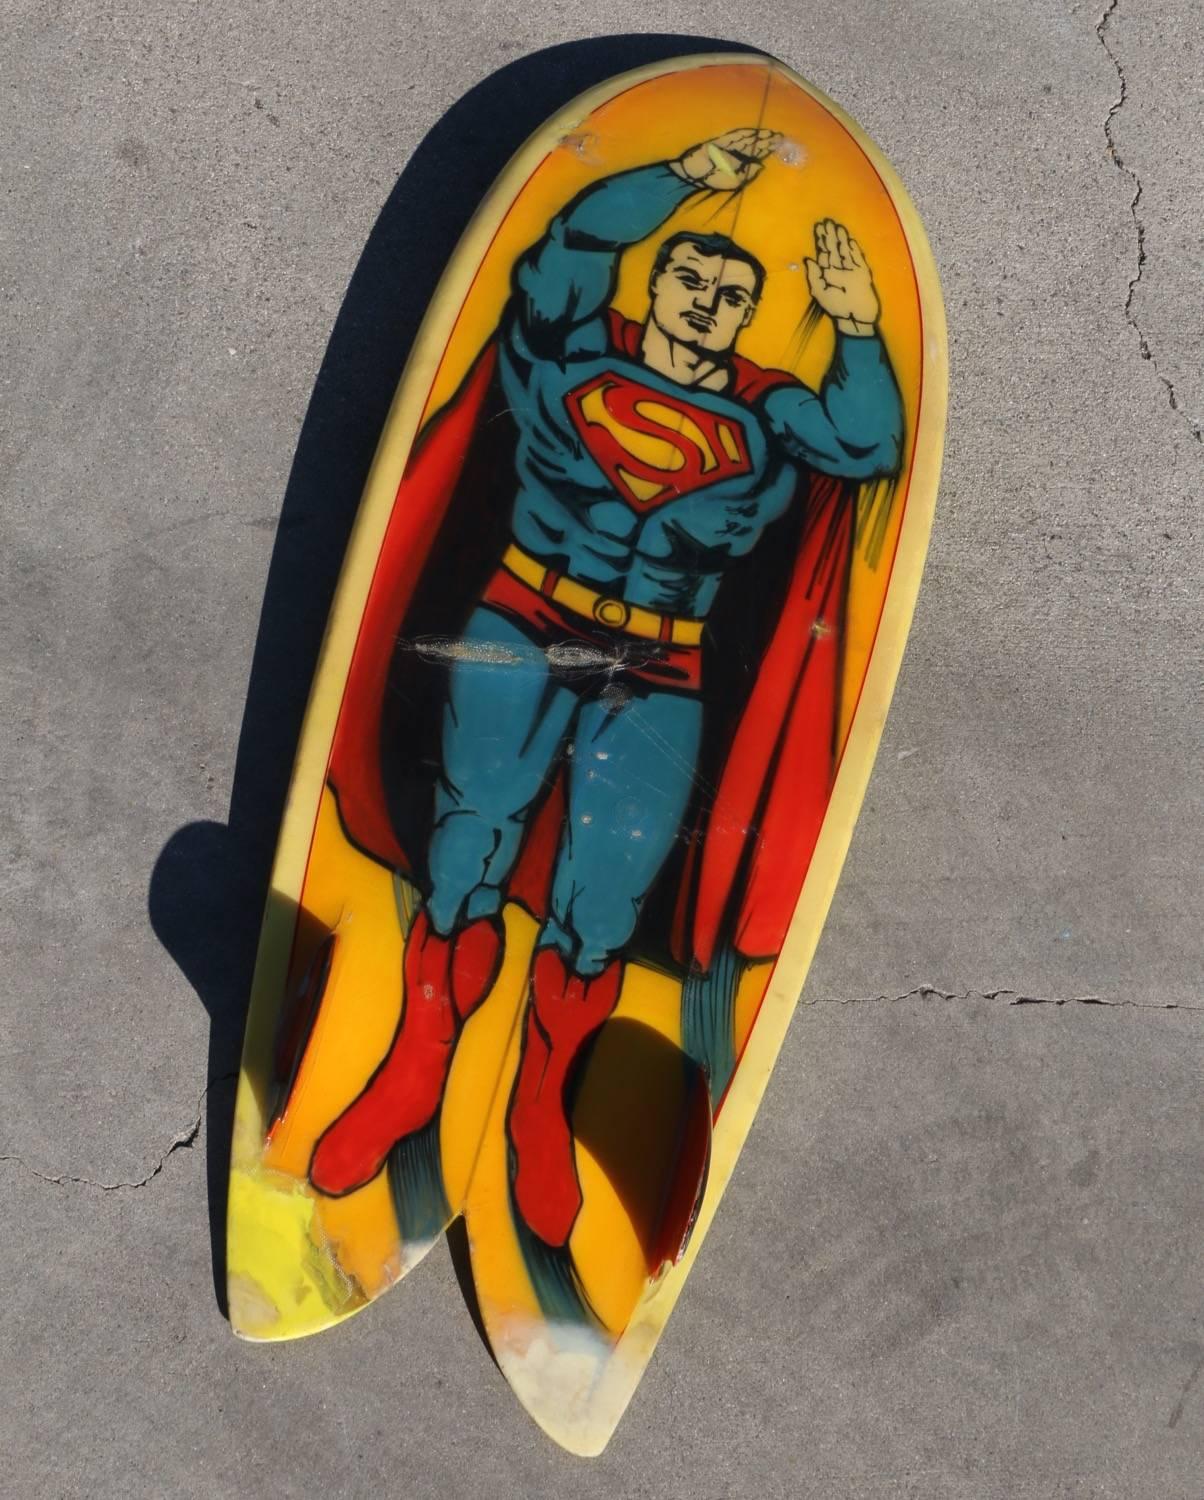 This Superman pocket rocket surfboard makes the ultimate super hero statement! All super-heros are good but superman is the best. Original condition, complete with dings, scratches and some old school repairs prove its authenticity.

This late